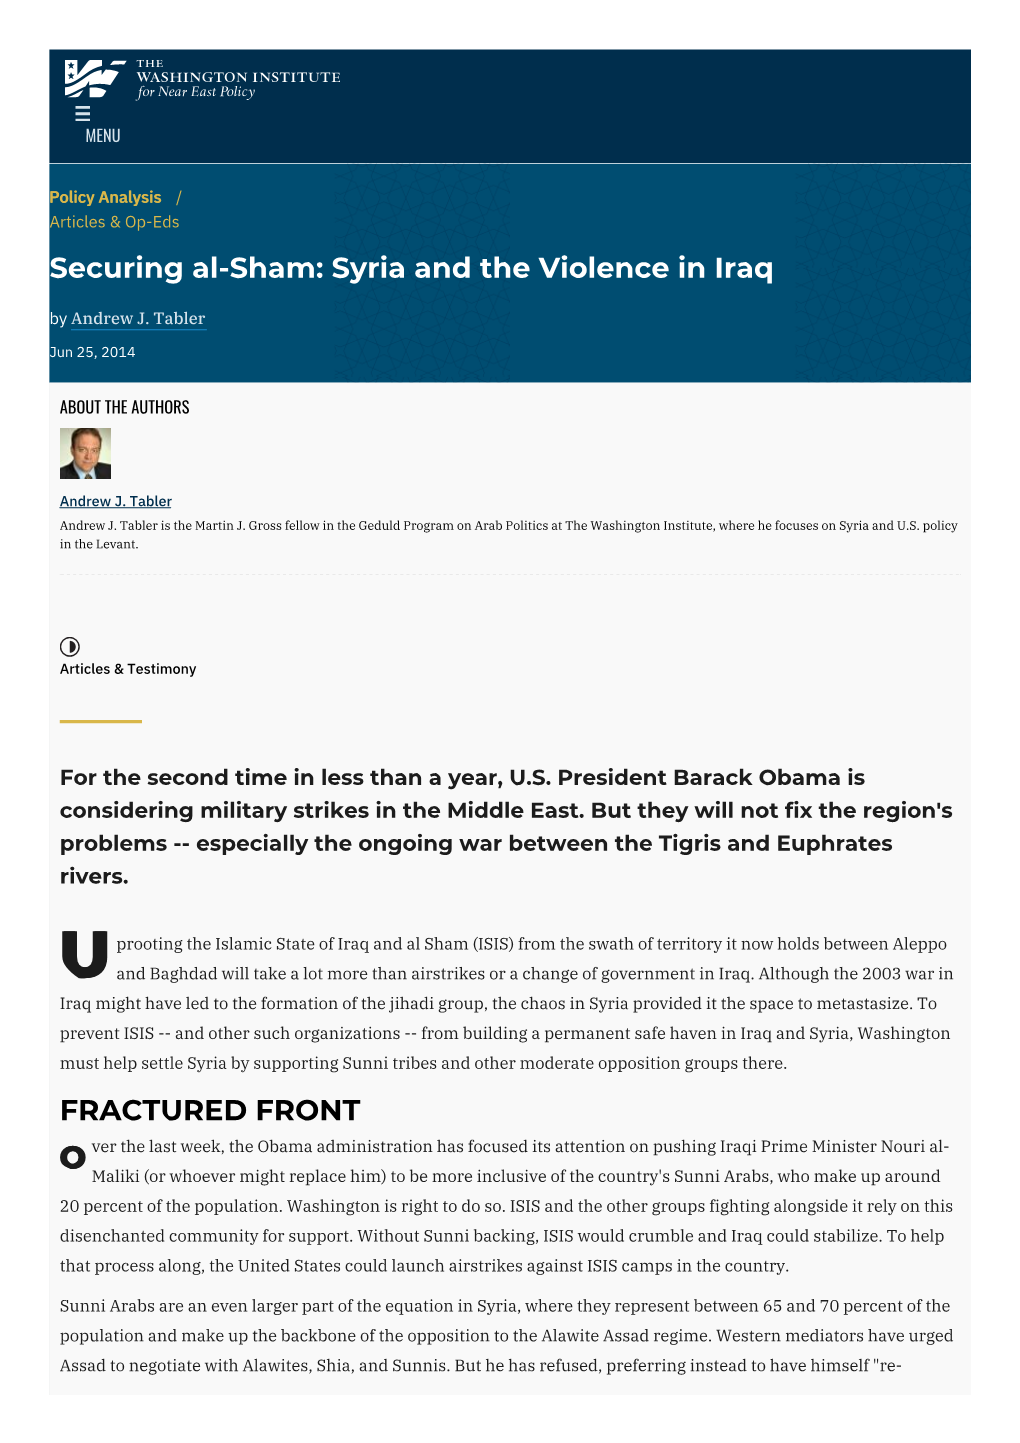 Syria and the Violence in Iraq by Andrew J